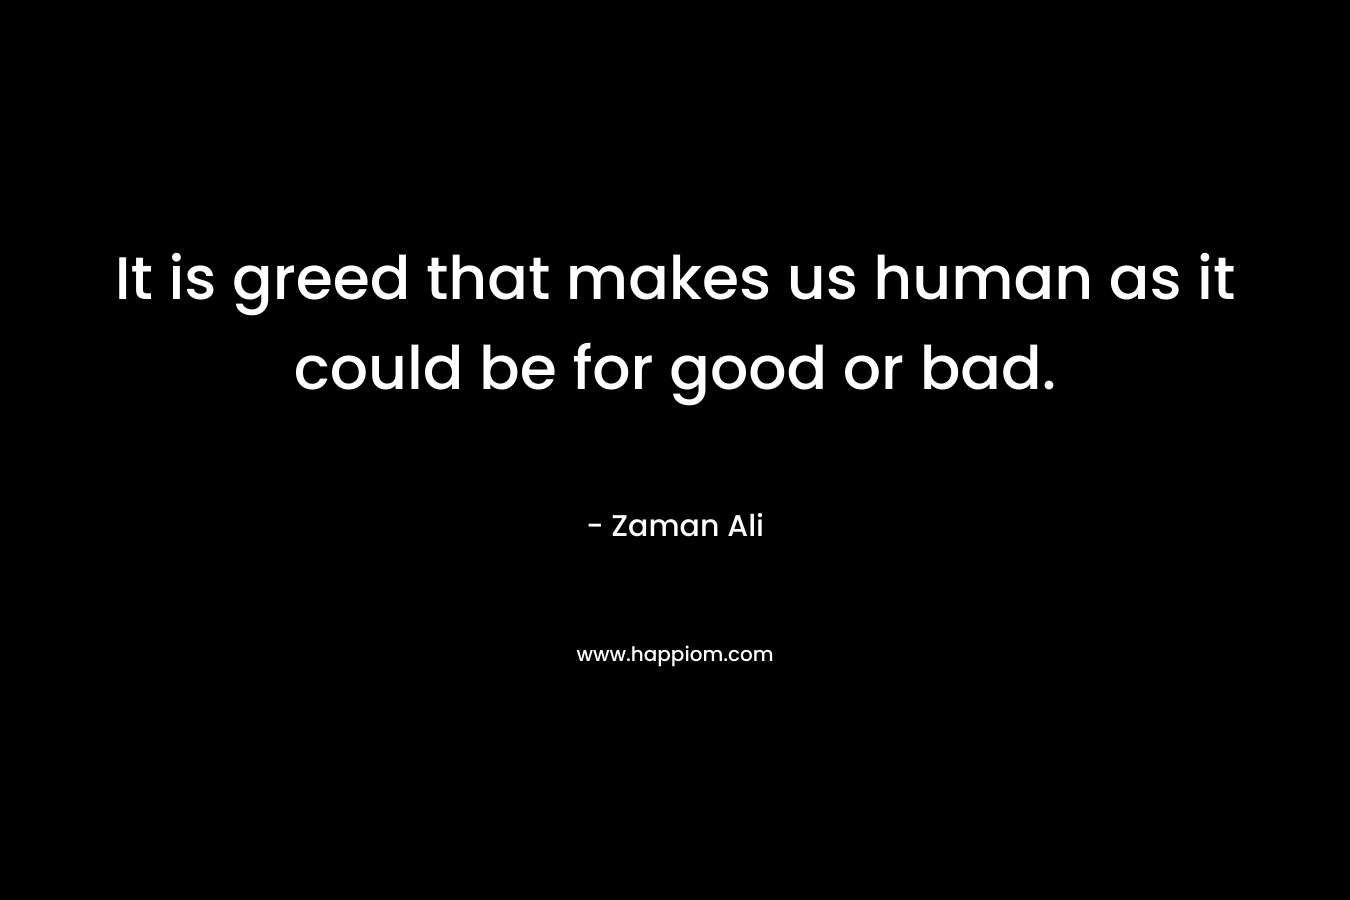 It is greed that makes us human as it could be for good or bad. – Zaman Ali